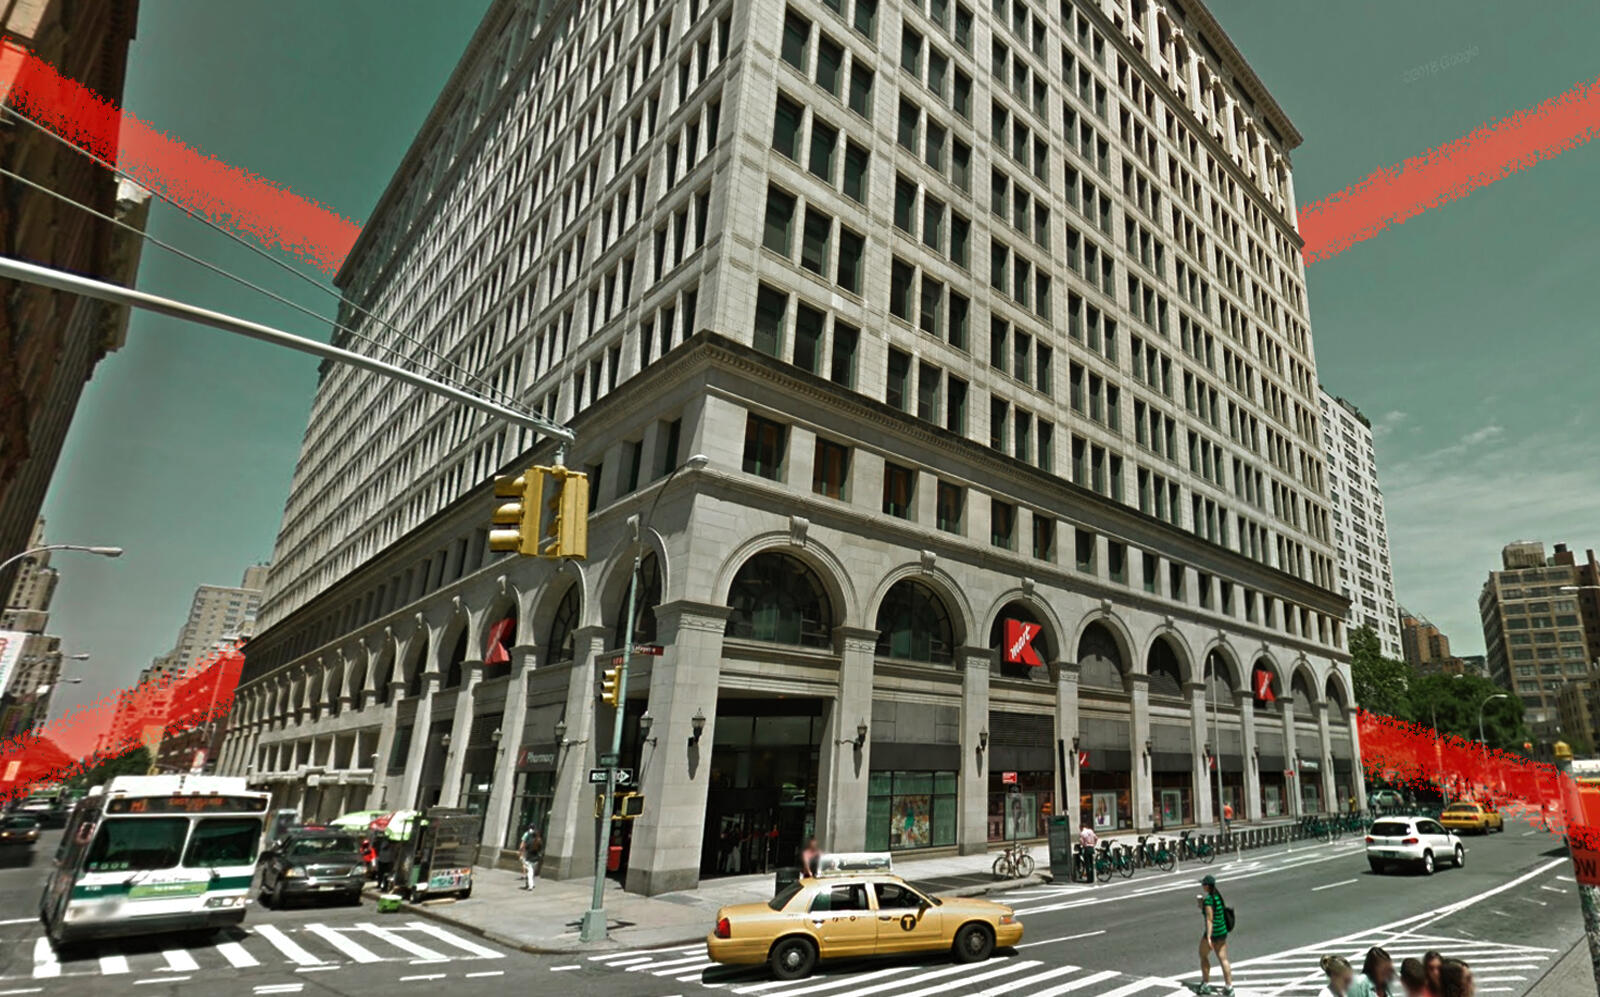 The Astor Place Kmart location (Google Maps)